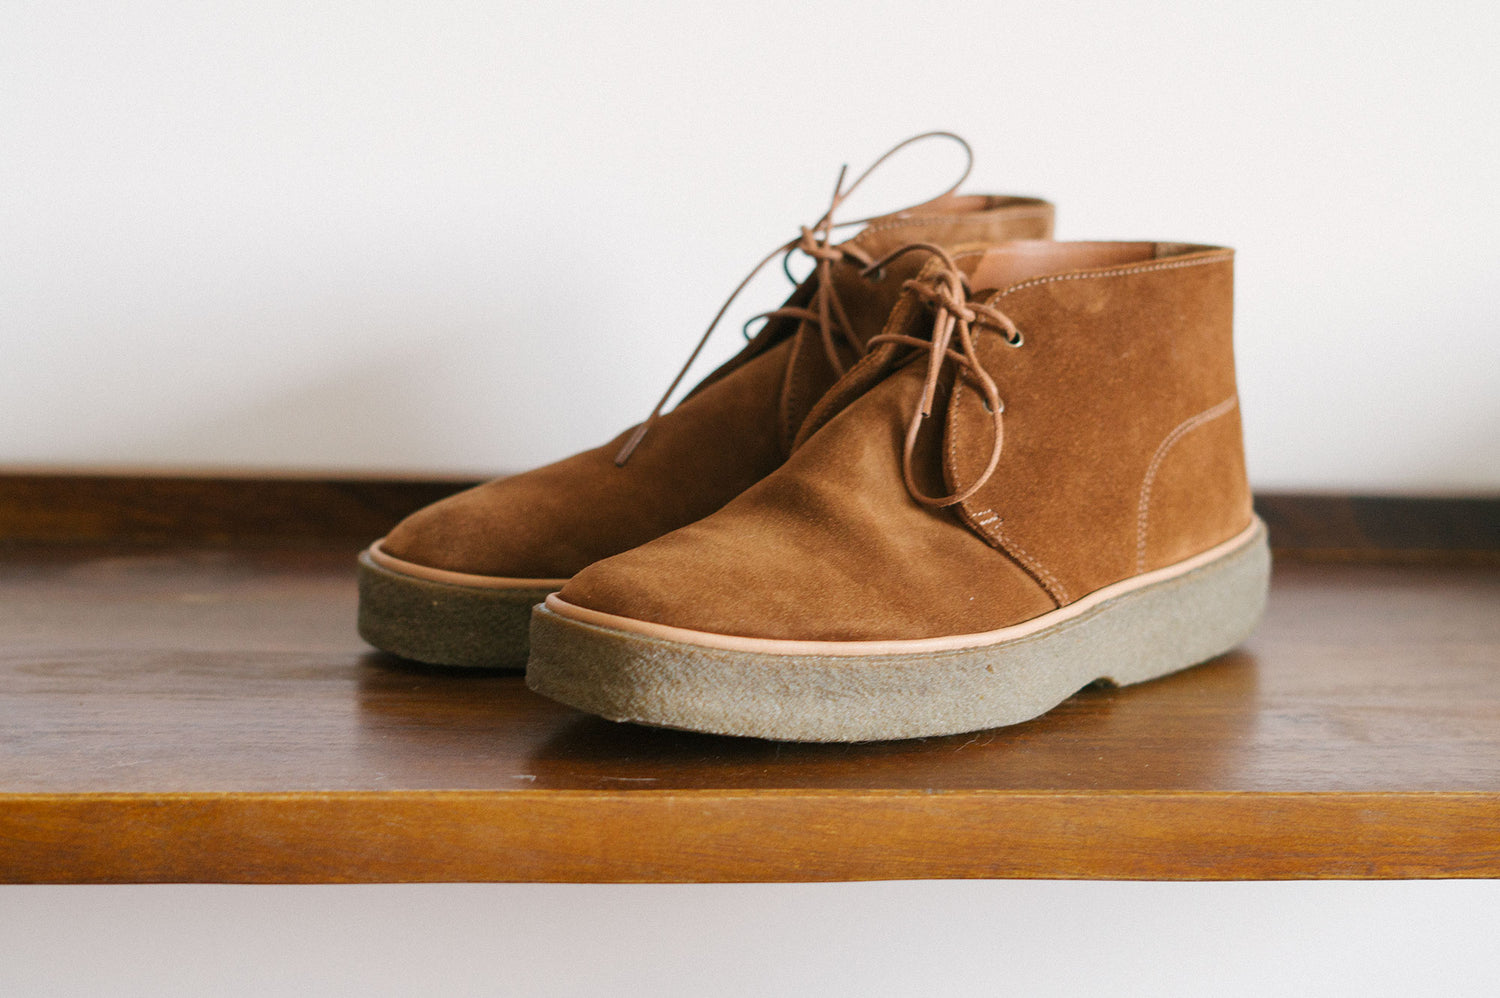 What Are Chukka Boots? The Definitive Guide